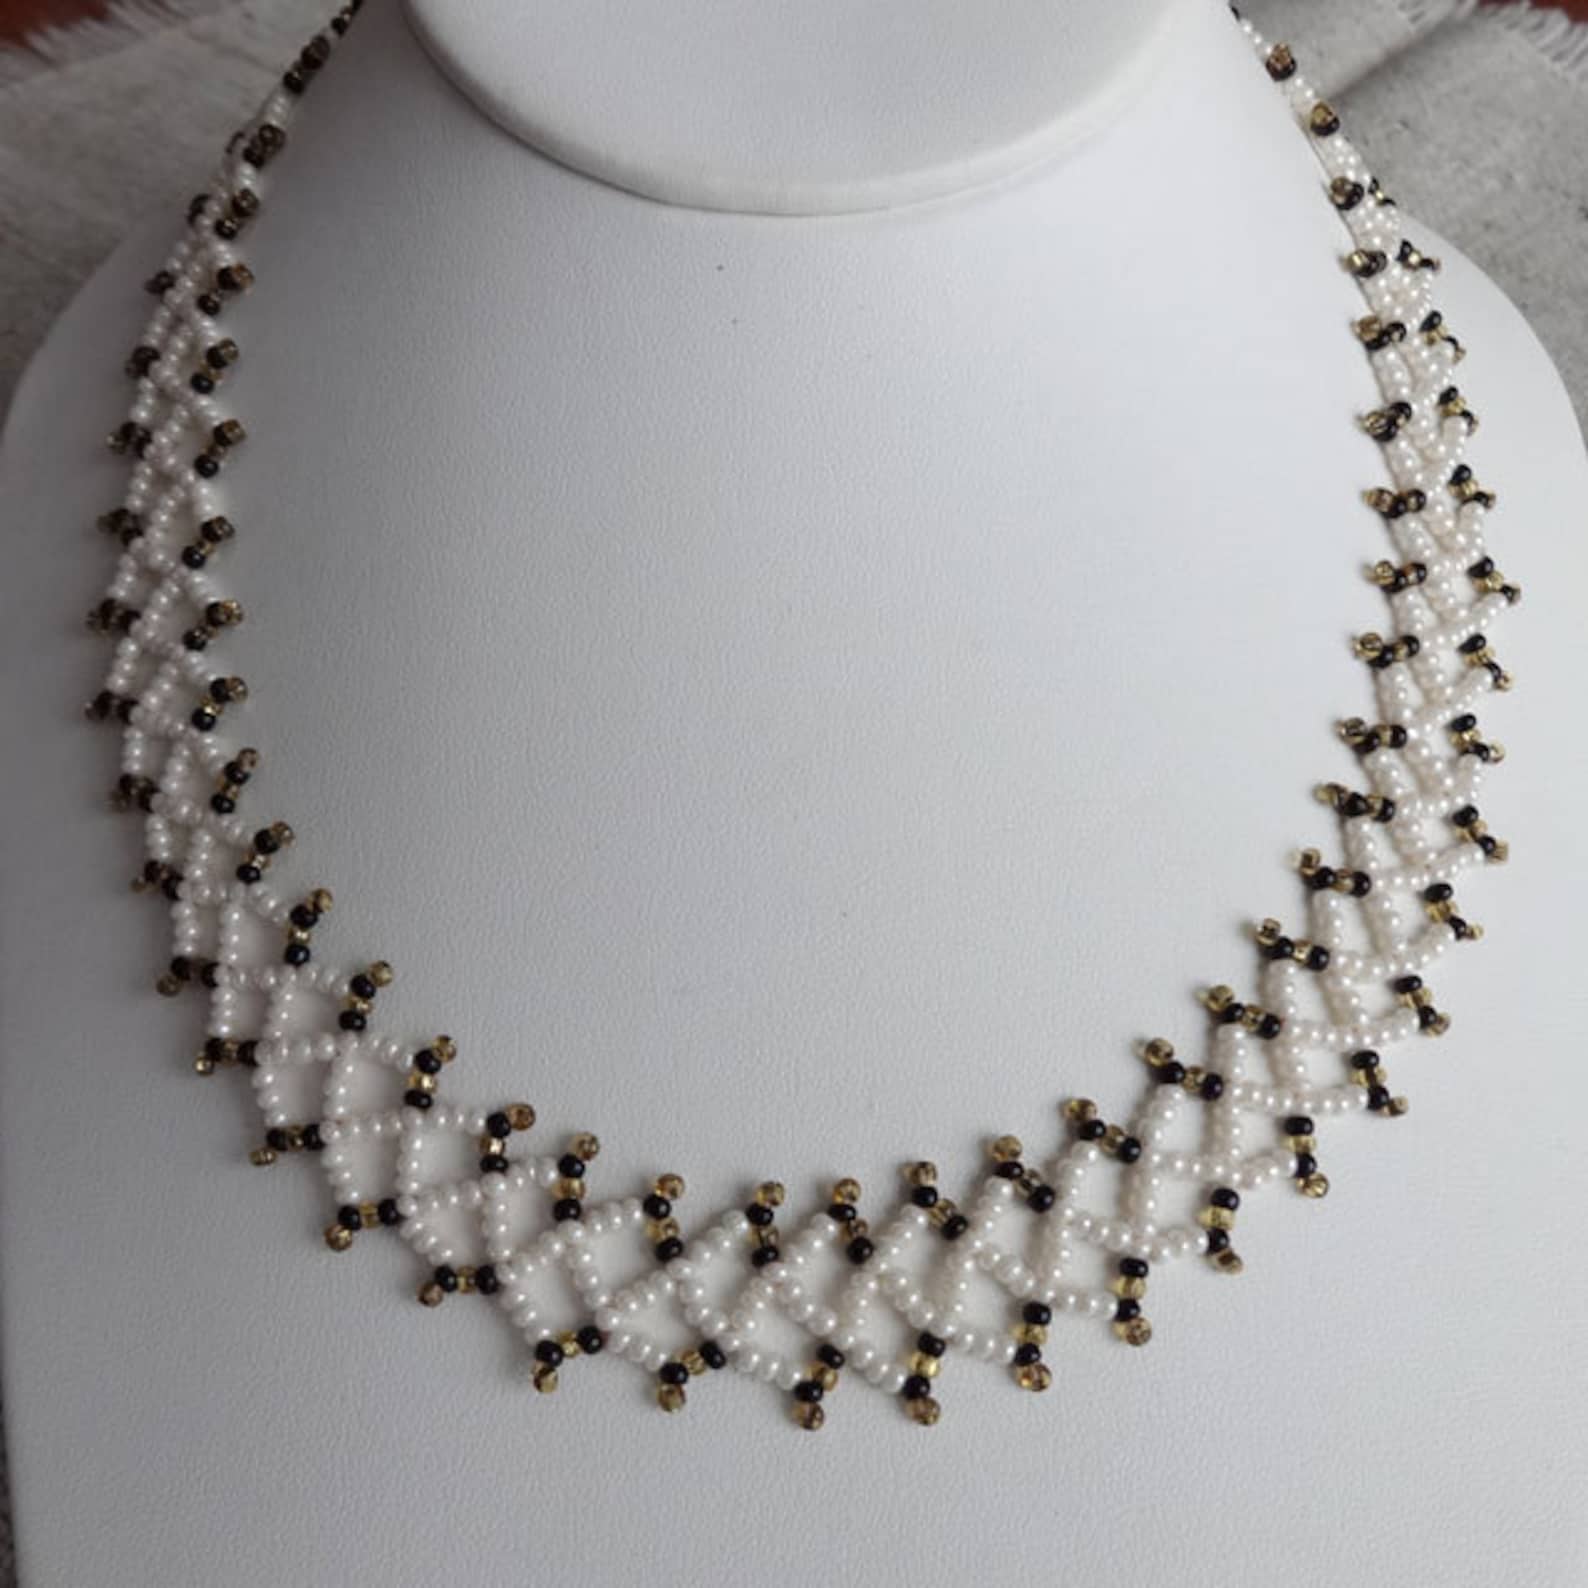 Vintage Hand Made Seed Bead Necklace - Etsy